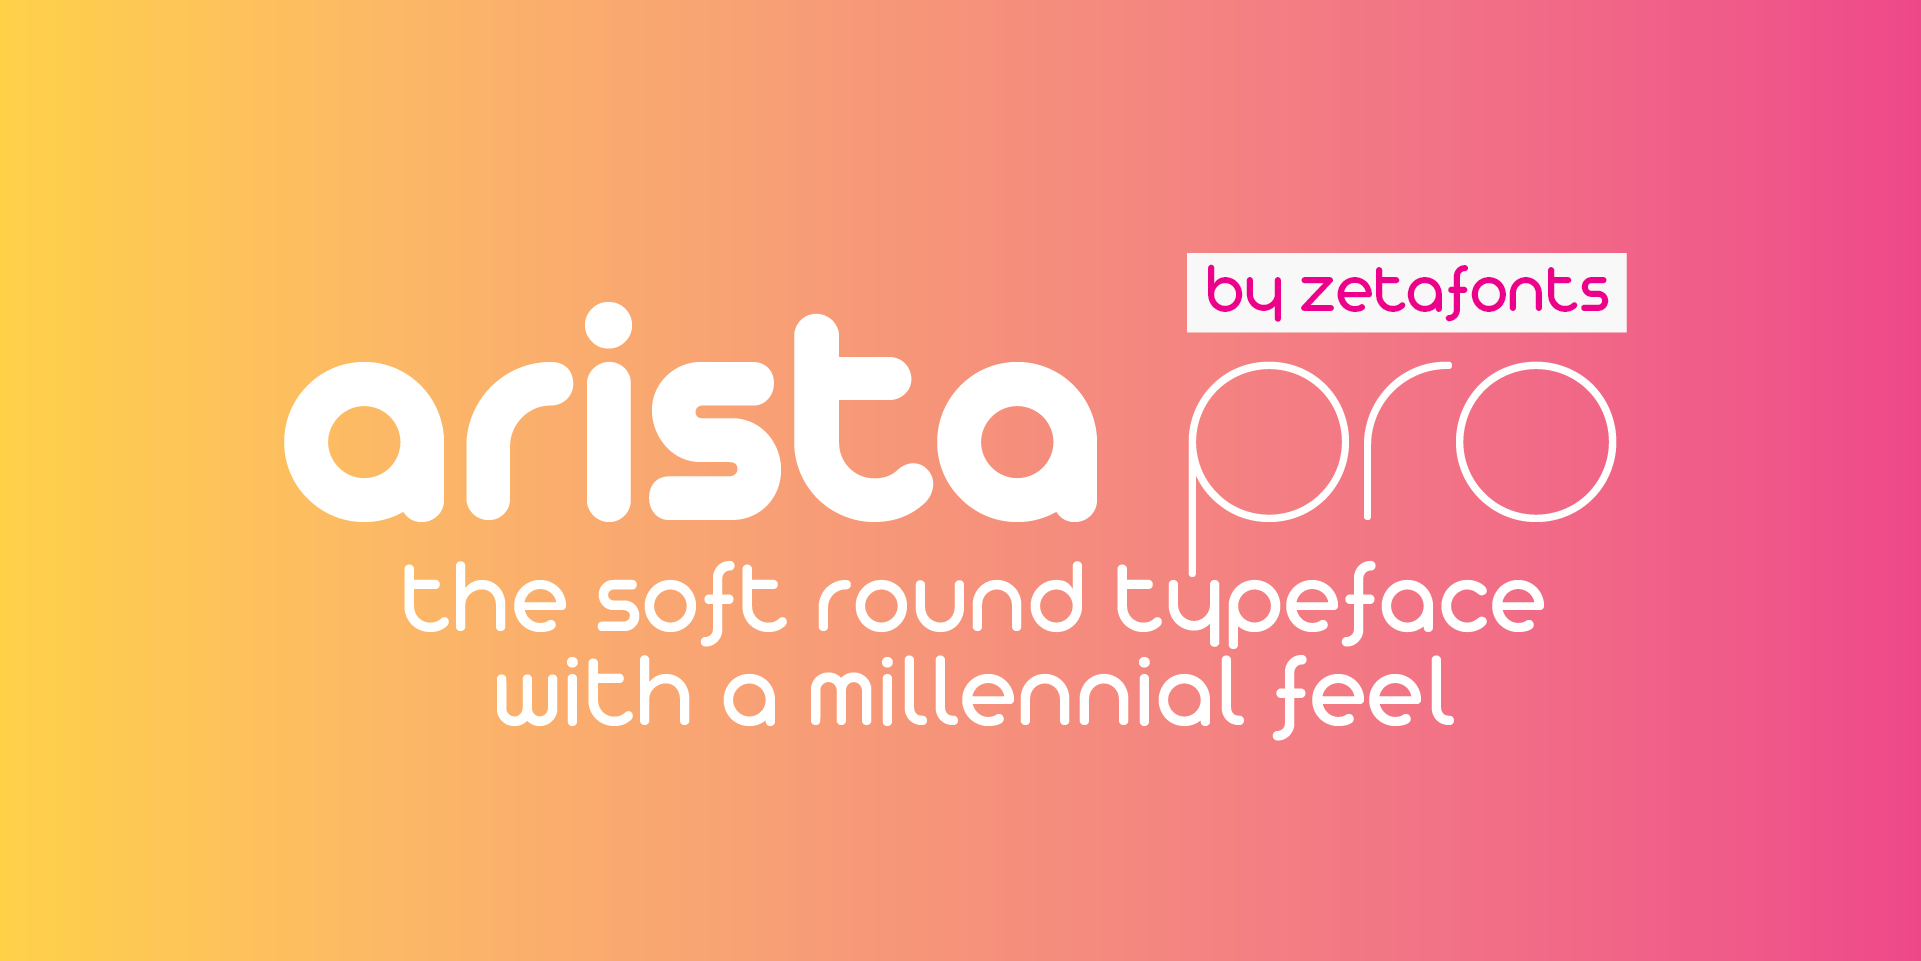 Arista Pro Hairline Font preview